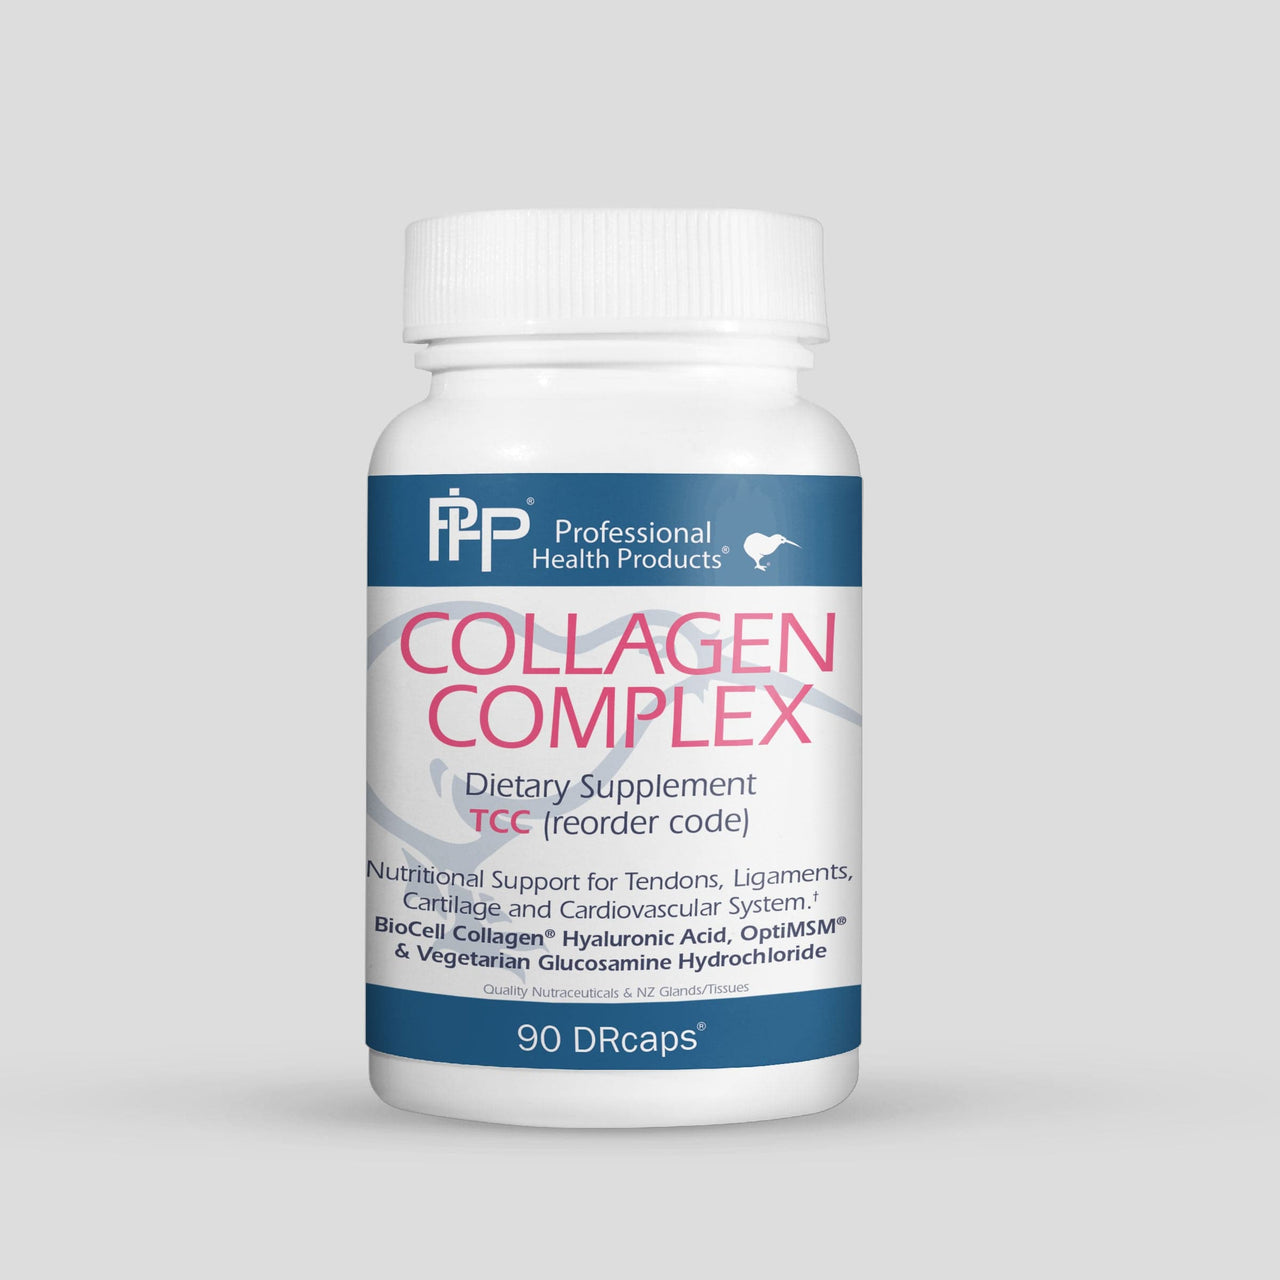 Collagen Complex Prof Health Products Supplement - Conners Clinic